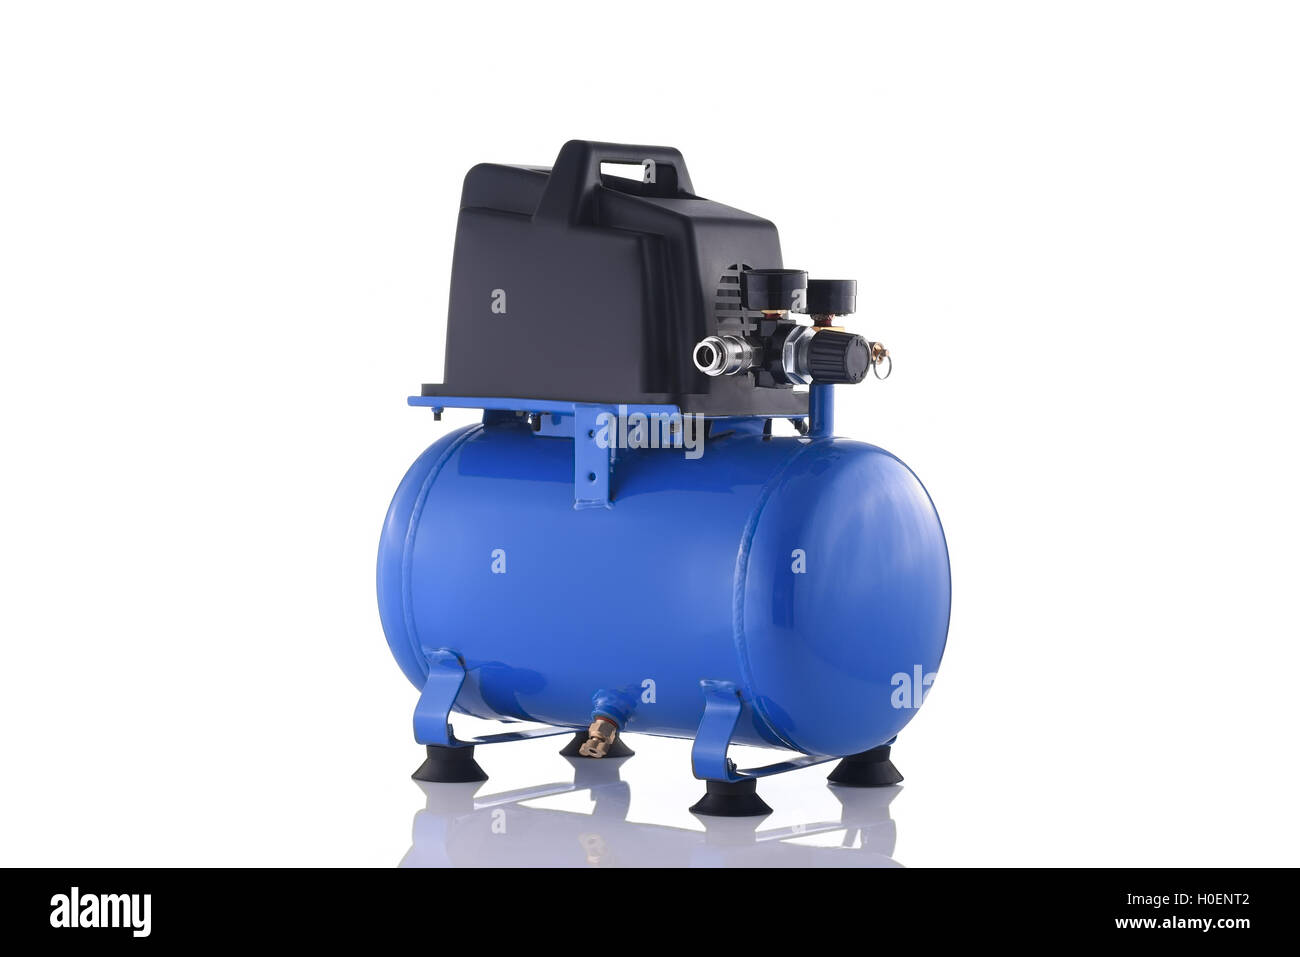 Mini blue compressor side view isolated on white background Stock Photo